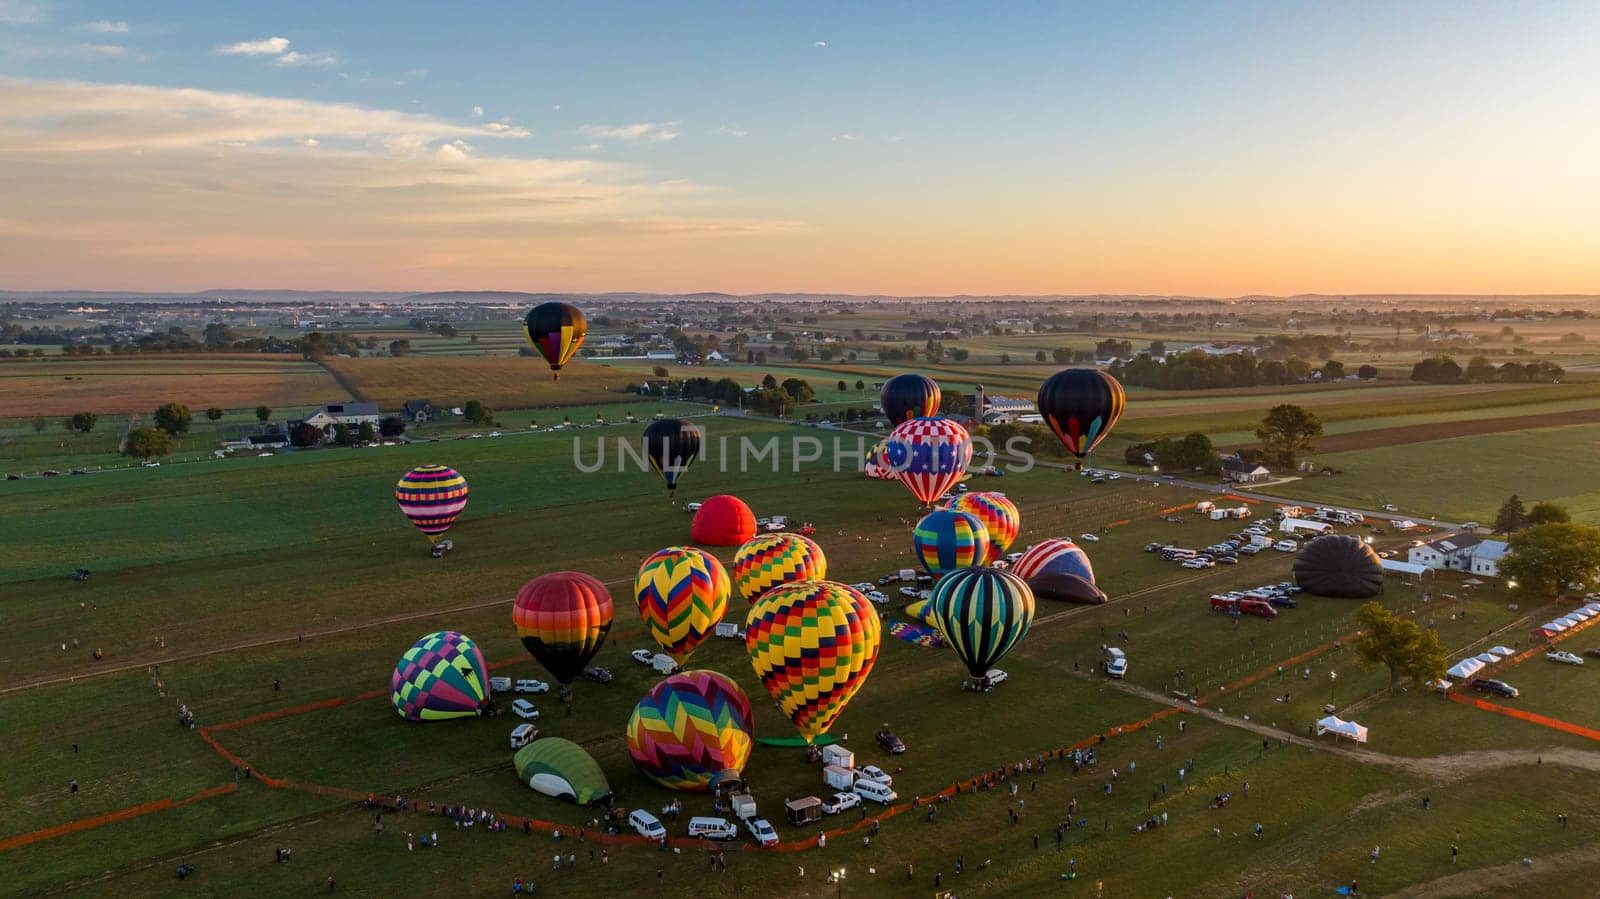 An Aerial View of Cluster Of Colorful Hot Air Balloons Preparing For Flight At Dawn With Spectators And Vehicles Gathered On A Rural Field.